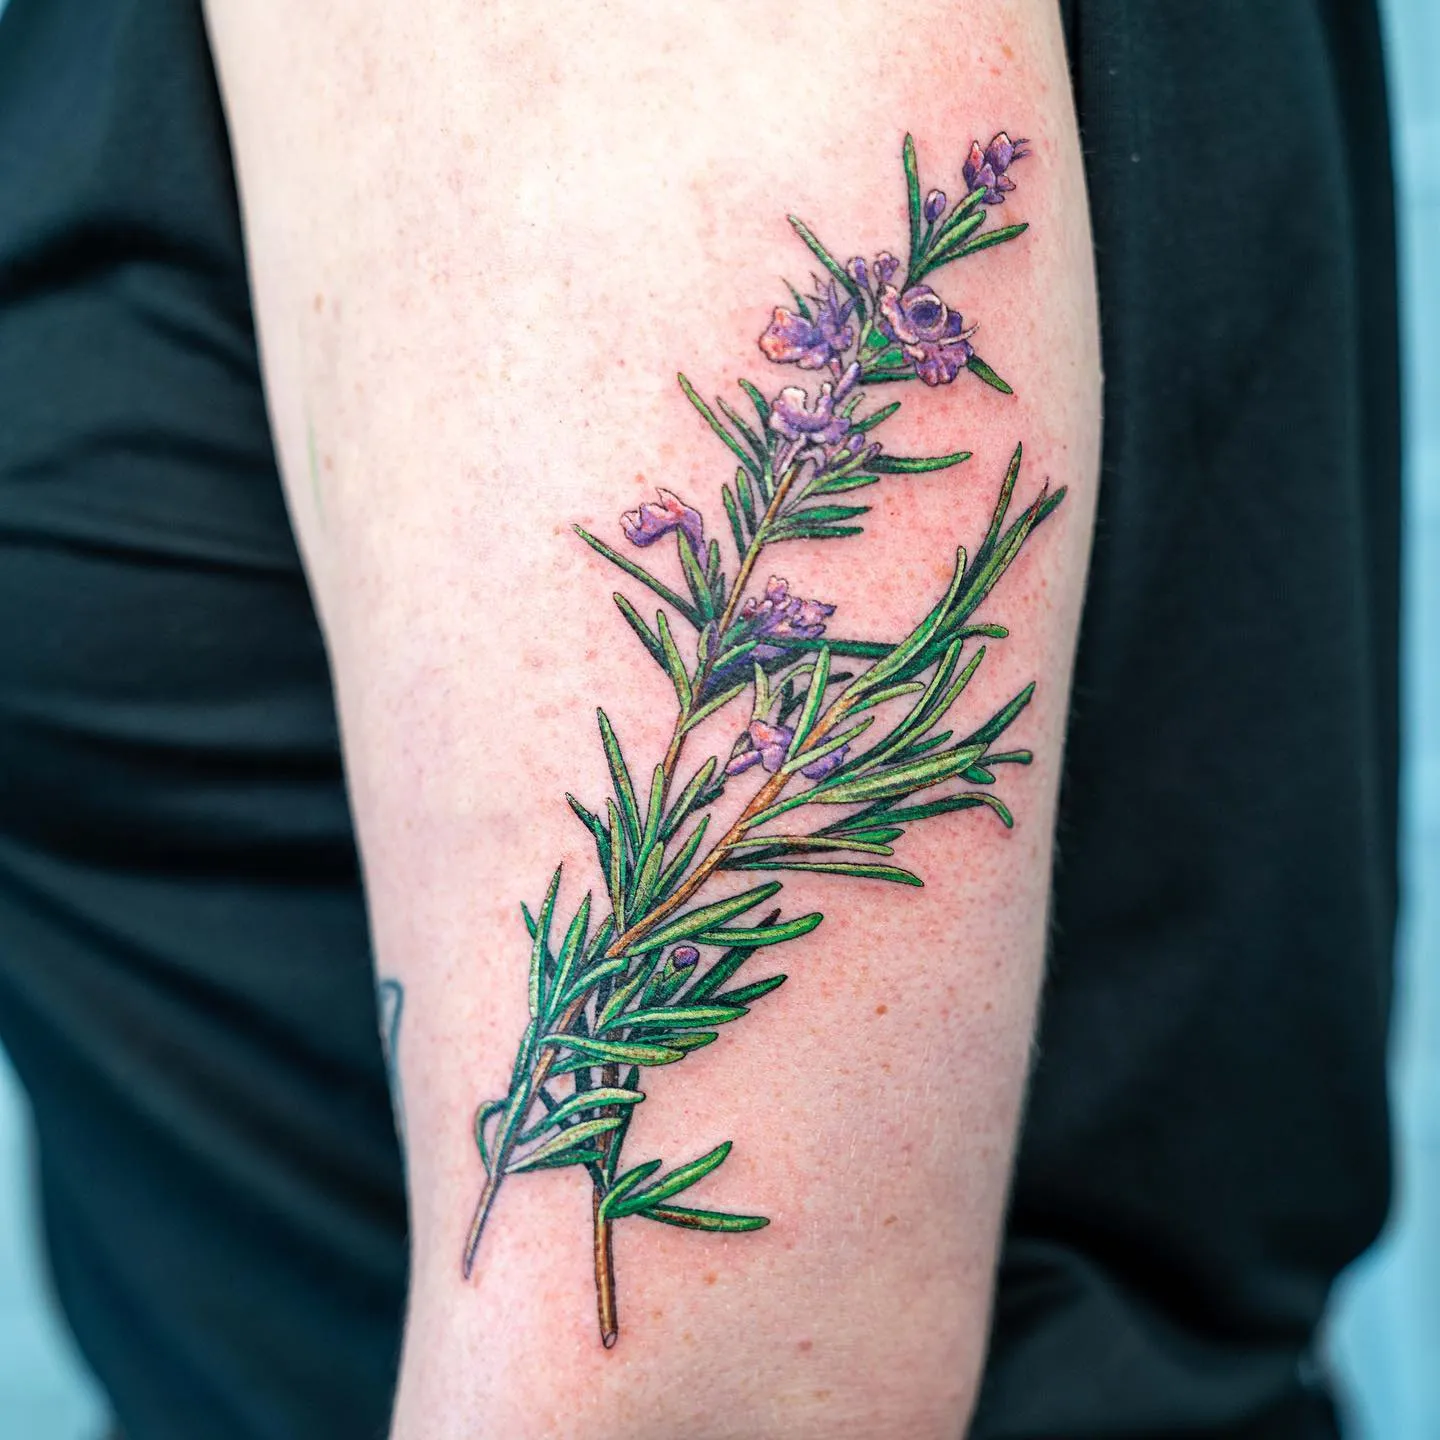 Vibrant Rosemary Branch with Flowers Tattoo